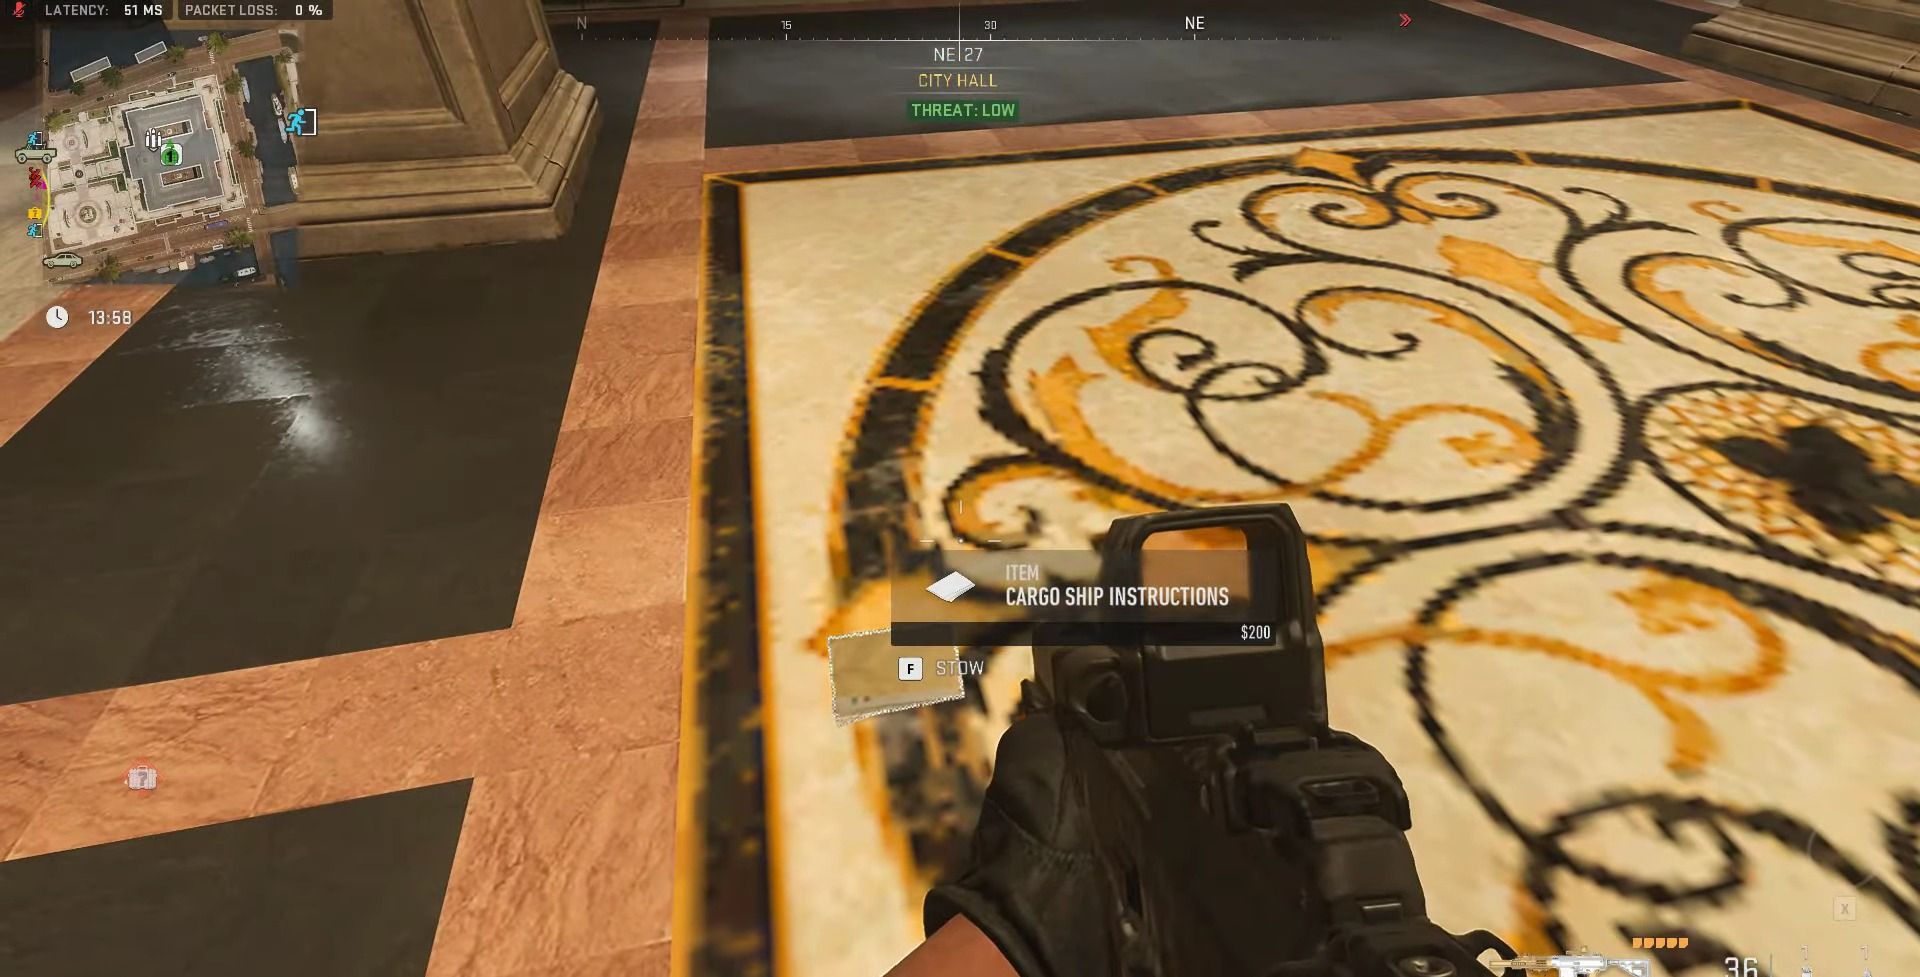 A player aiming at Cargo ship instructions on the ground in COD Warzone 2 DMZ.